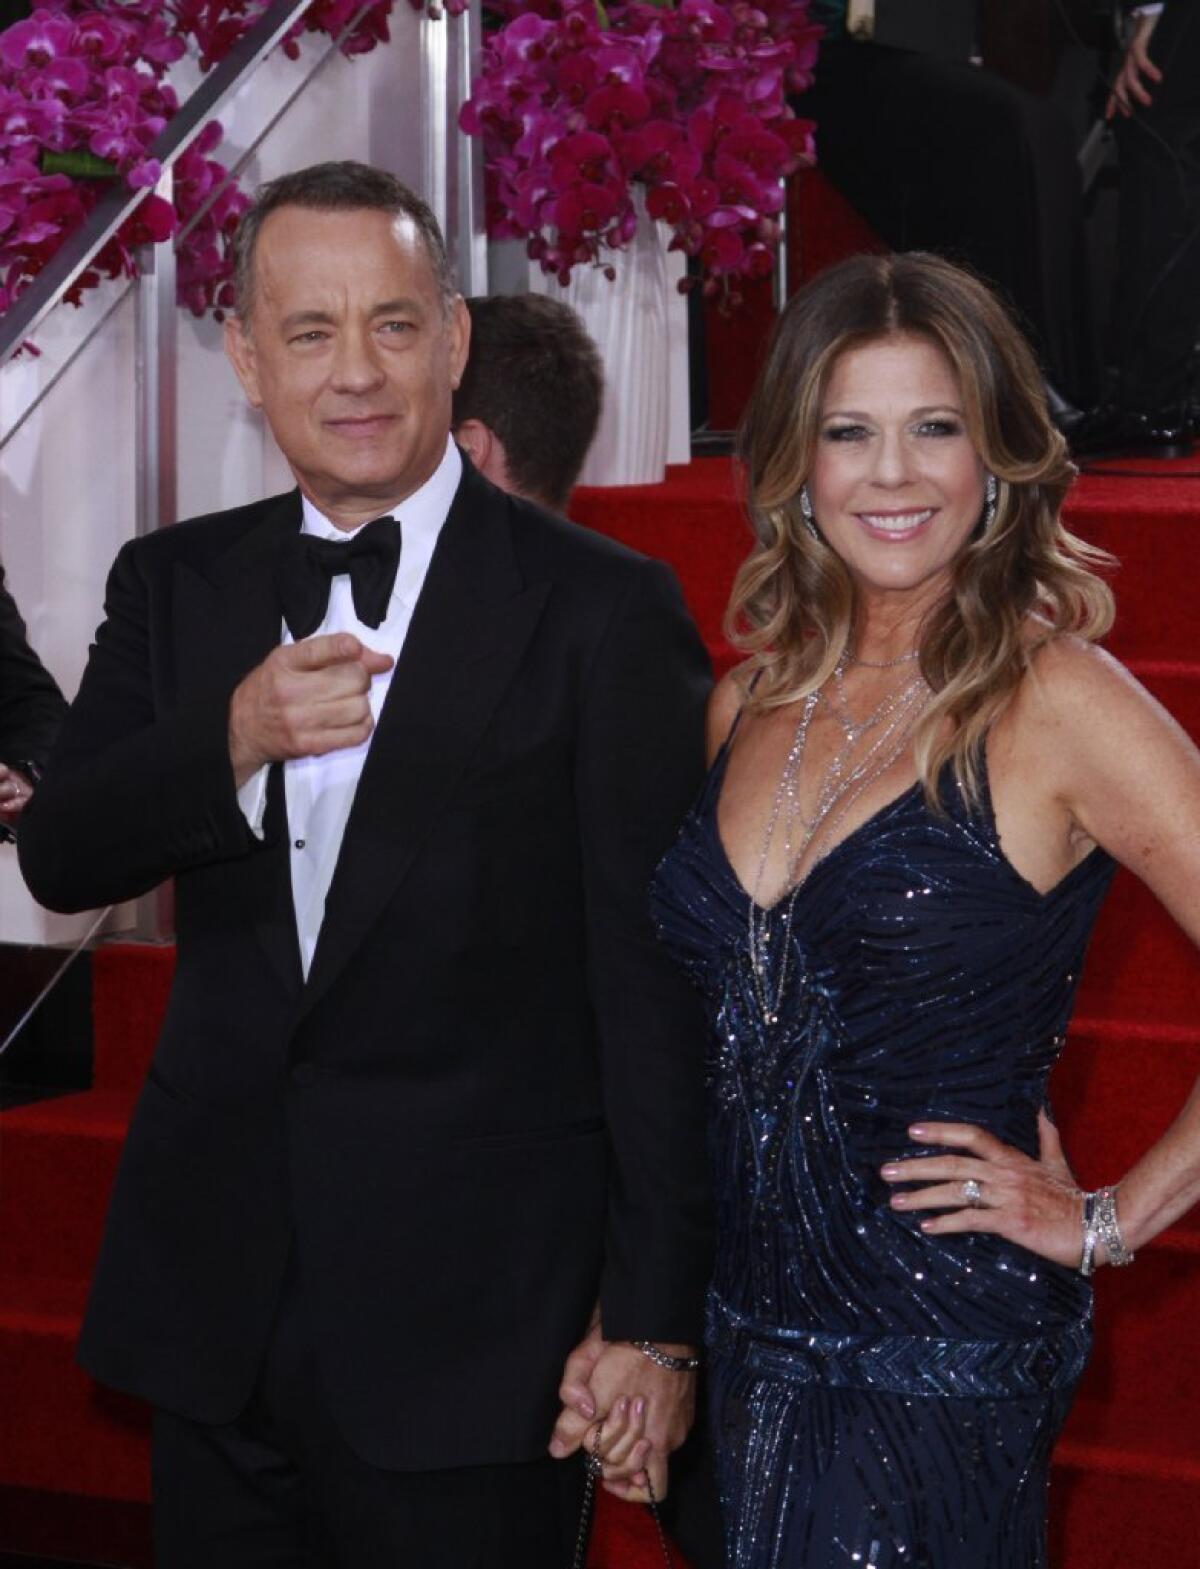 Tom Hanks and Rita Wilson arrive for the 71st Annual Golden Globe Awards show at the Beverly Hilton Hotel on Jan. 12, 2014.